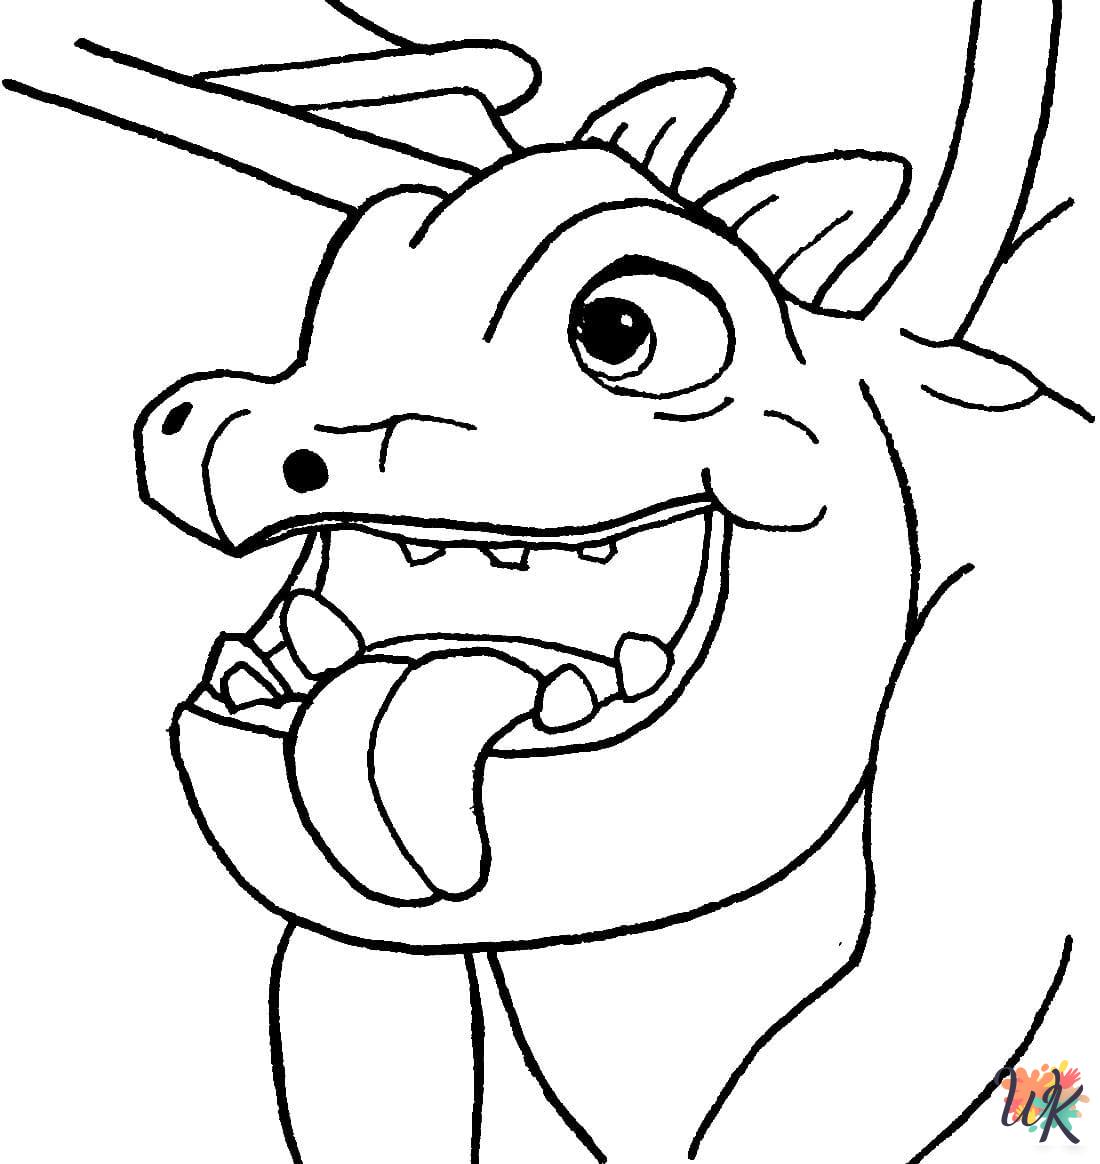 Clash Royale coloring pages free